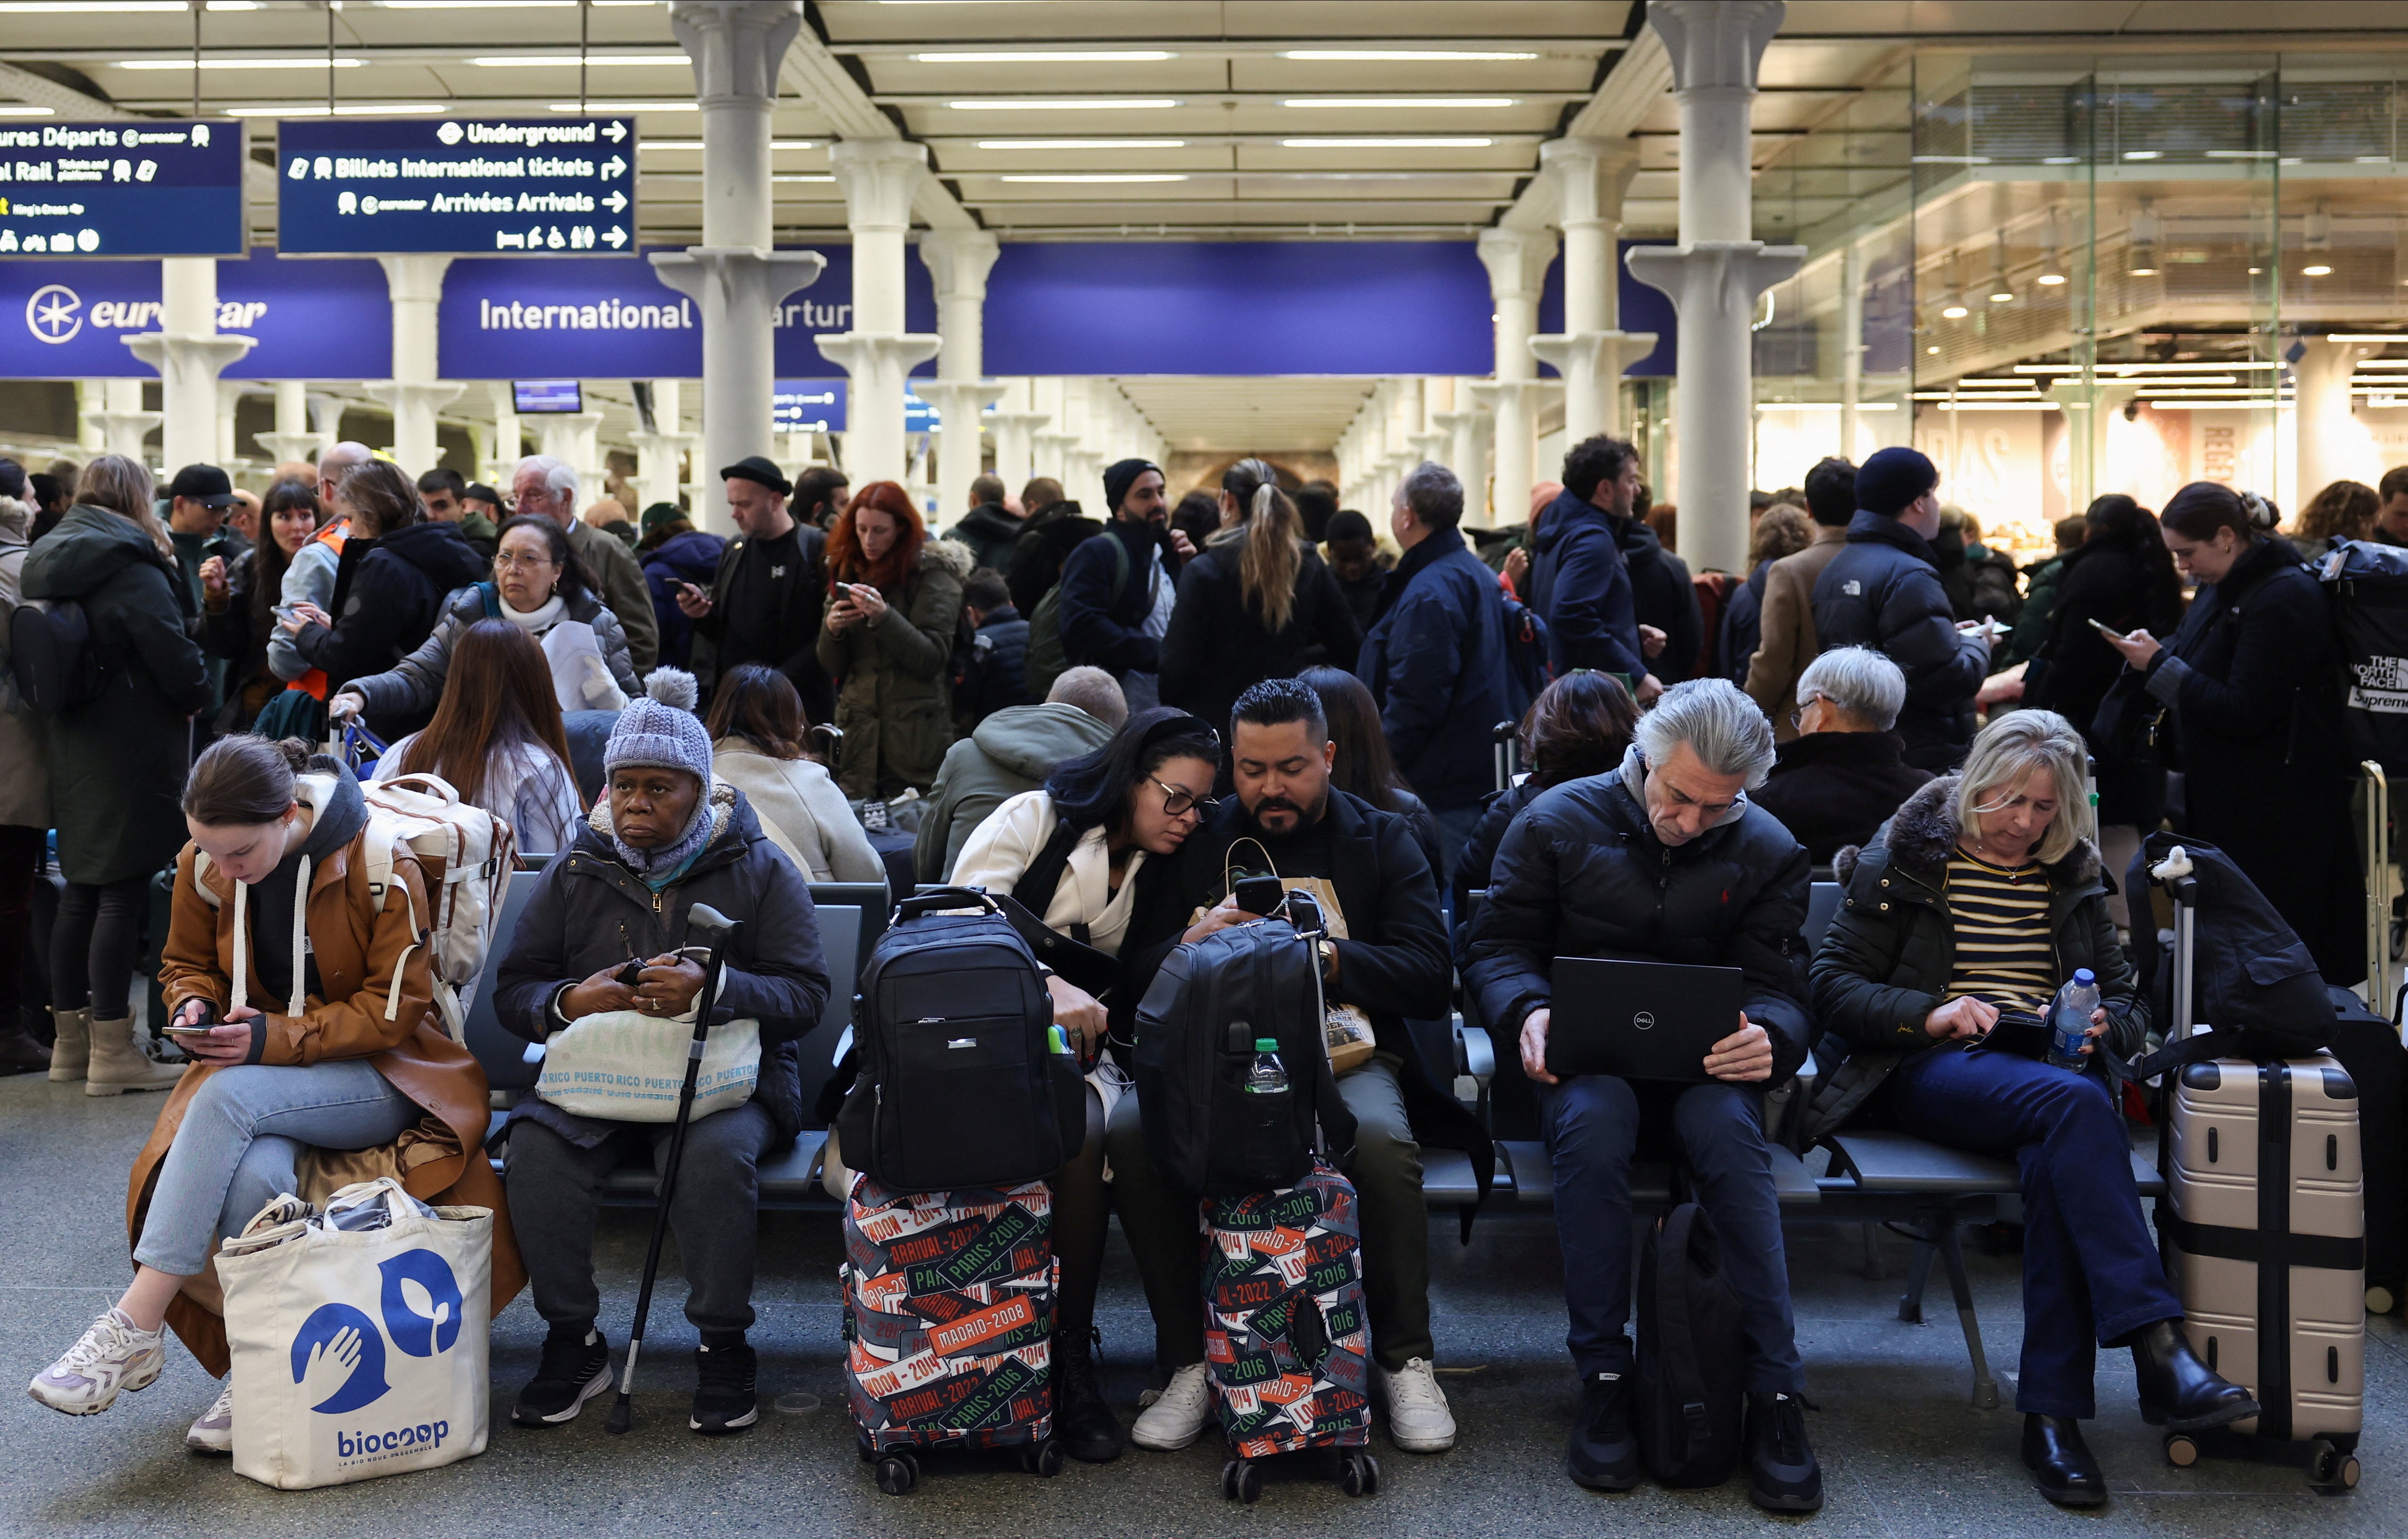 Passengers wait at the Eurostar terminal at St Pancras International as an unexpected strike held up travel plans